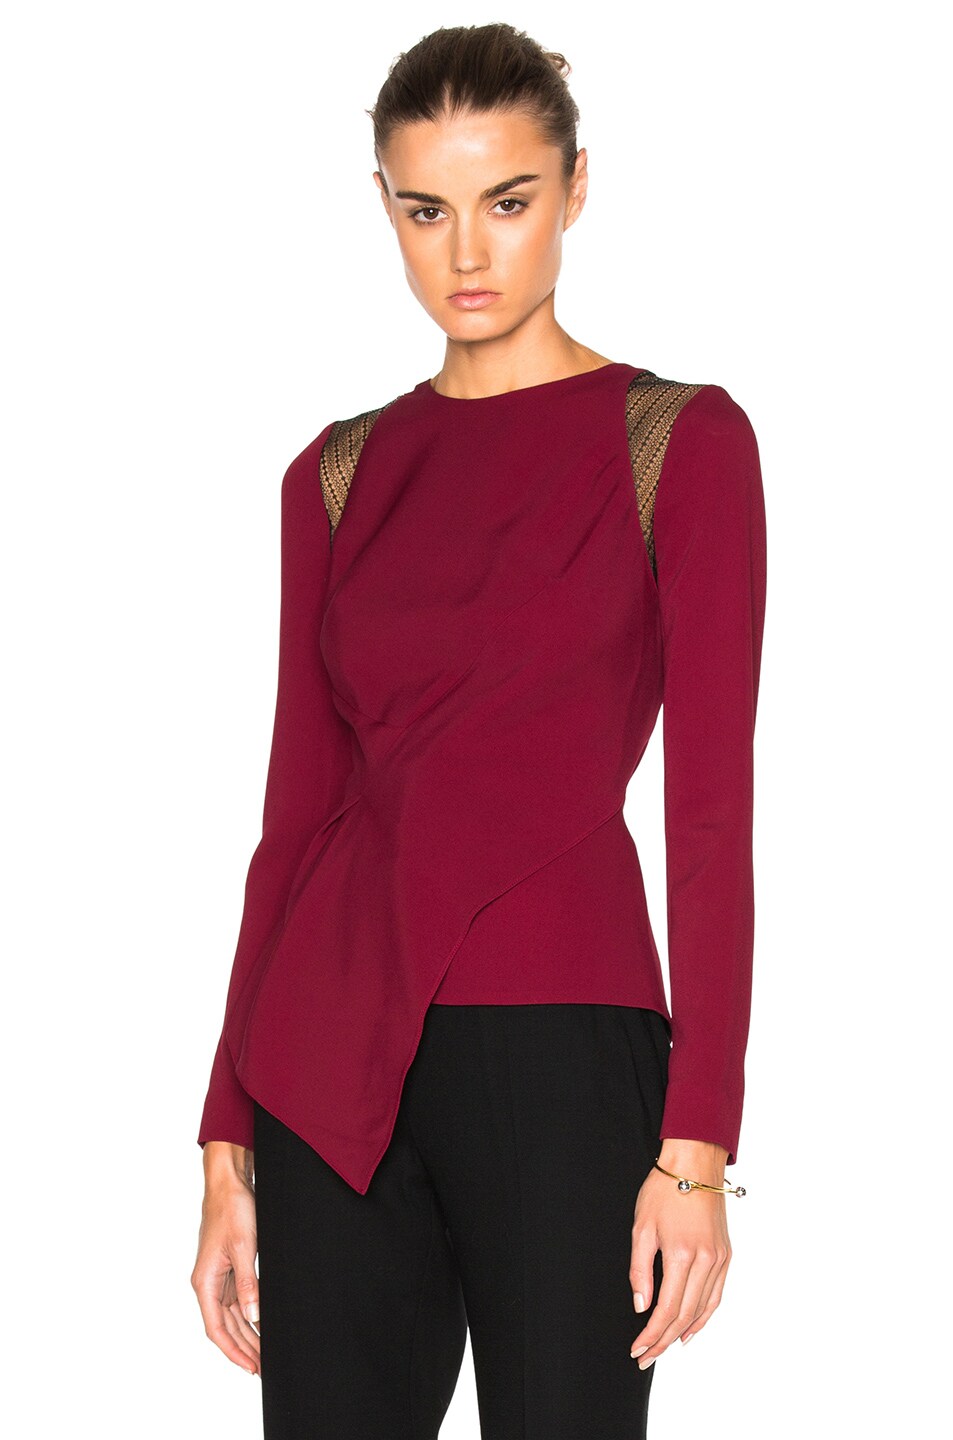 Image 1 of Roland Mouret Ebner Crepe & Layered Lace Top in Cherry Red/Black